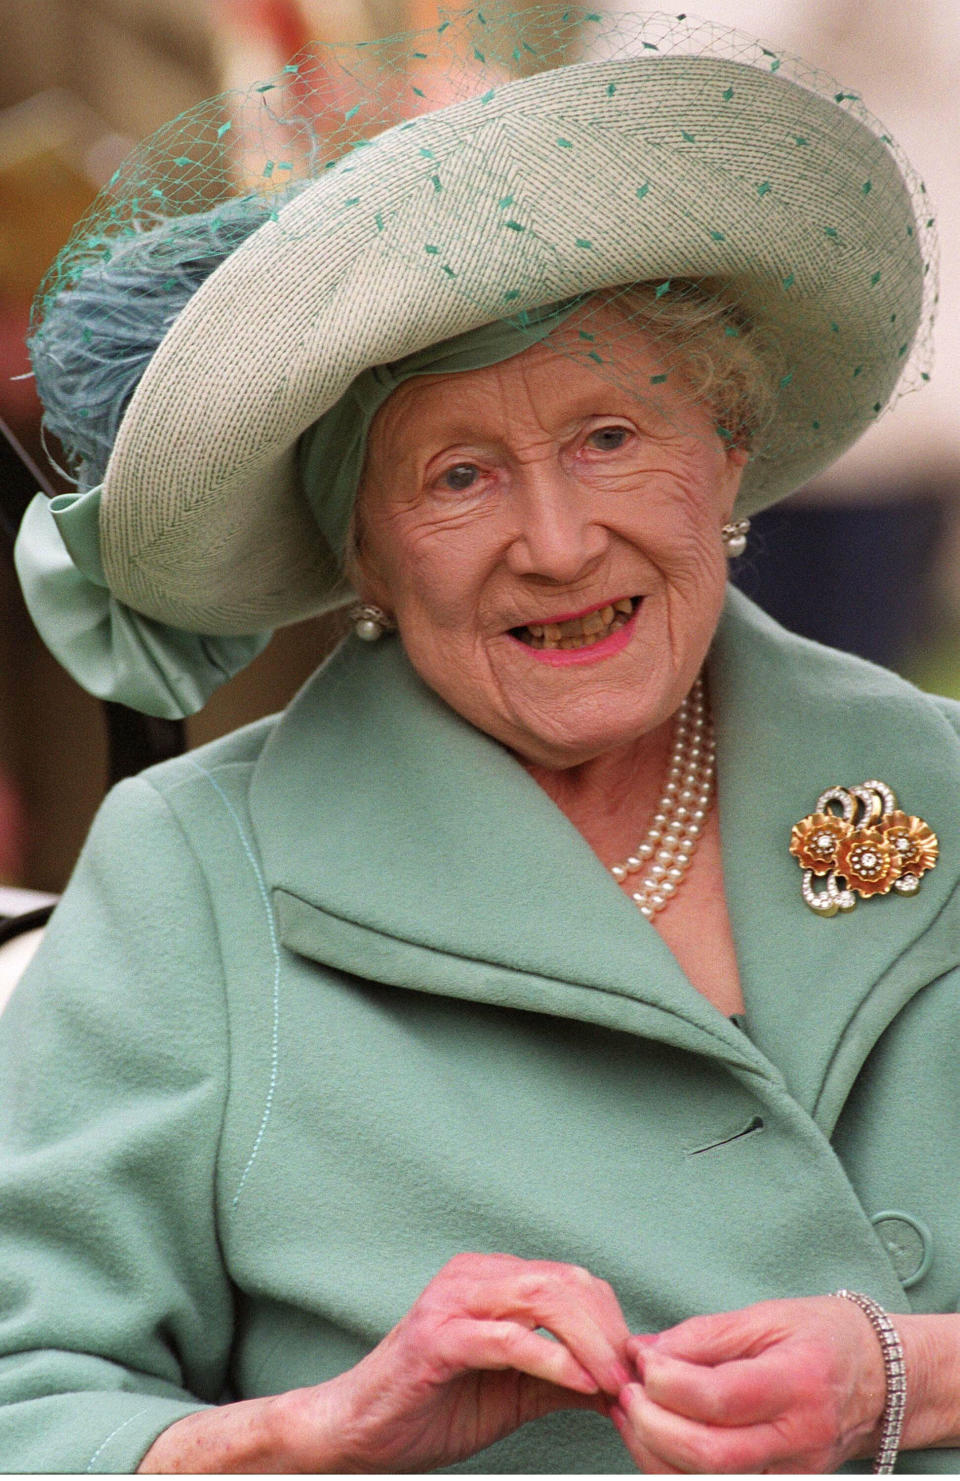 The Queen Mother at the Cheltenham Gold Cup on March 16, 2002 (Photo by Anwar Hussein/WireImage)